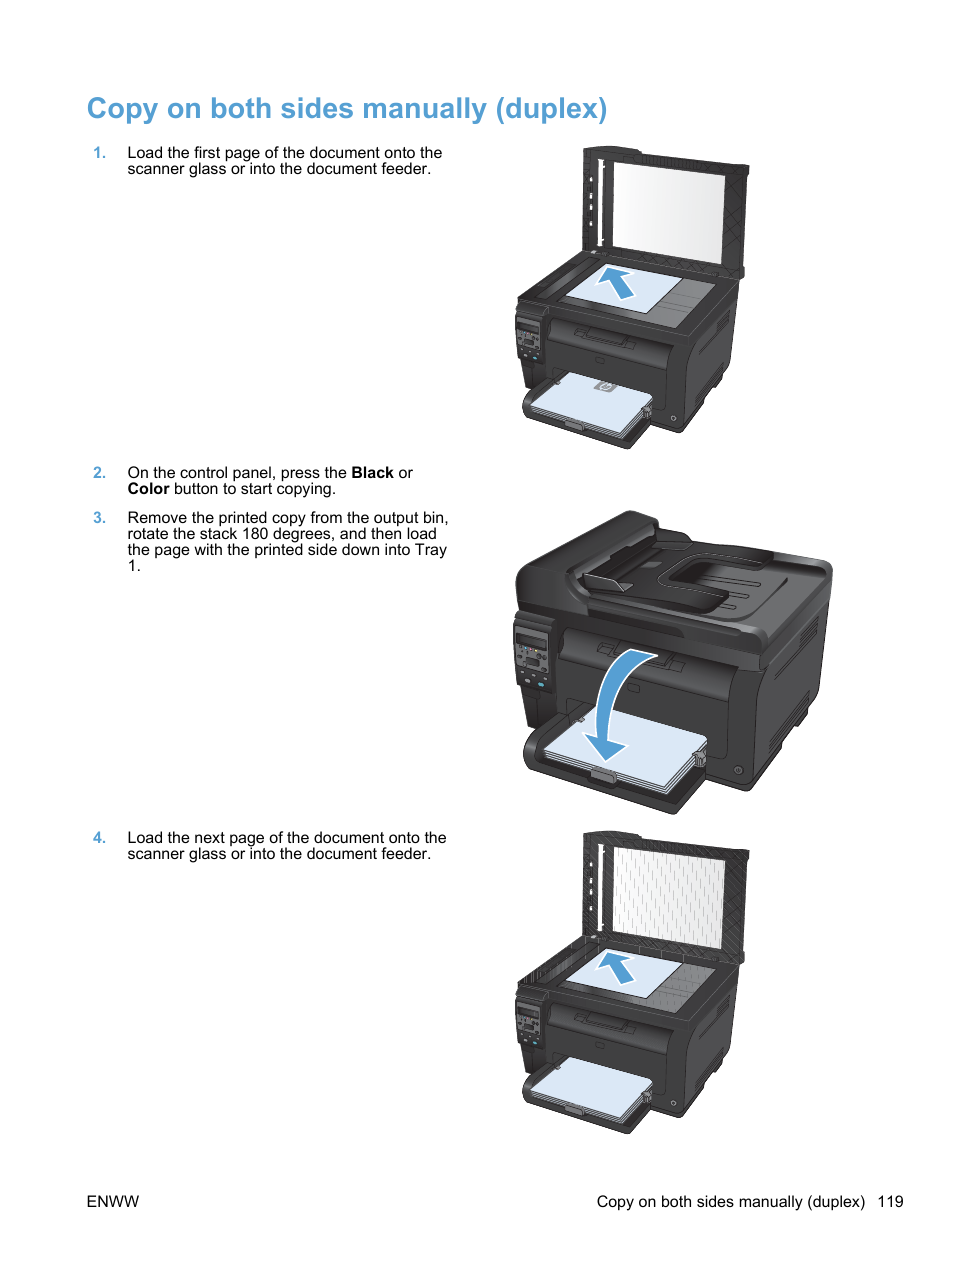 Copy on both sides manually (duplex) | HP LaserJet Pro MFP M175nw User Manual Page 133 /